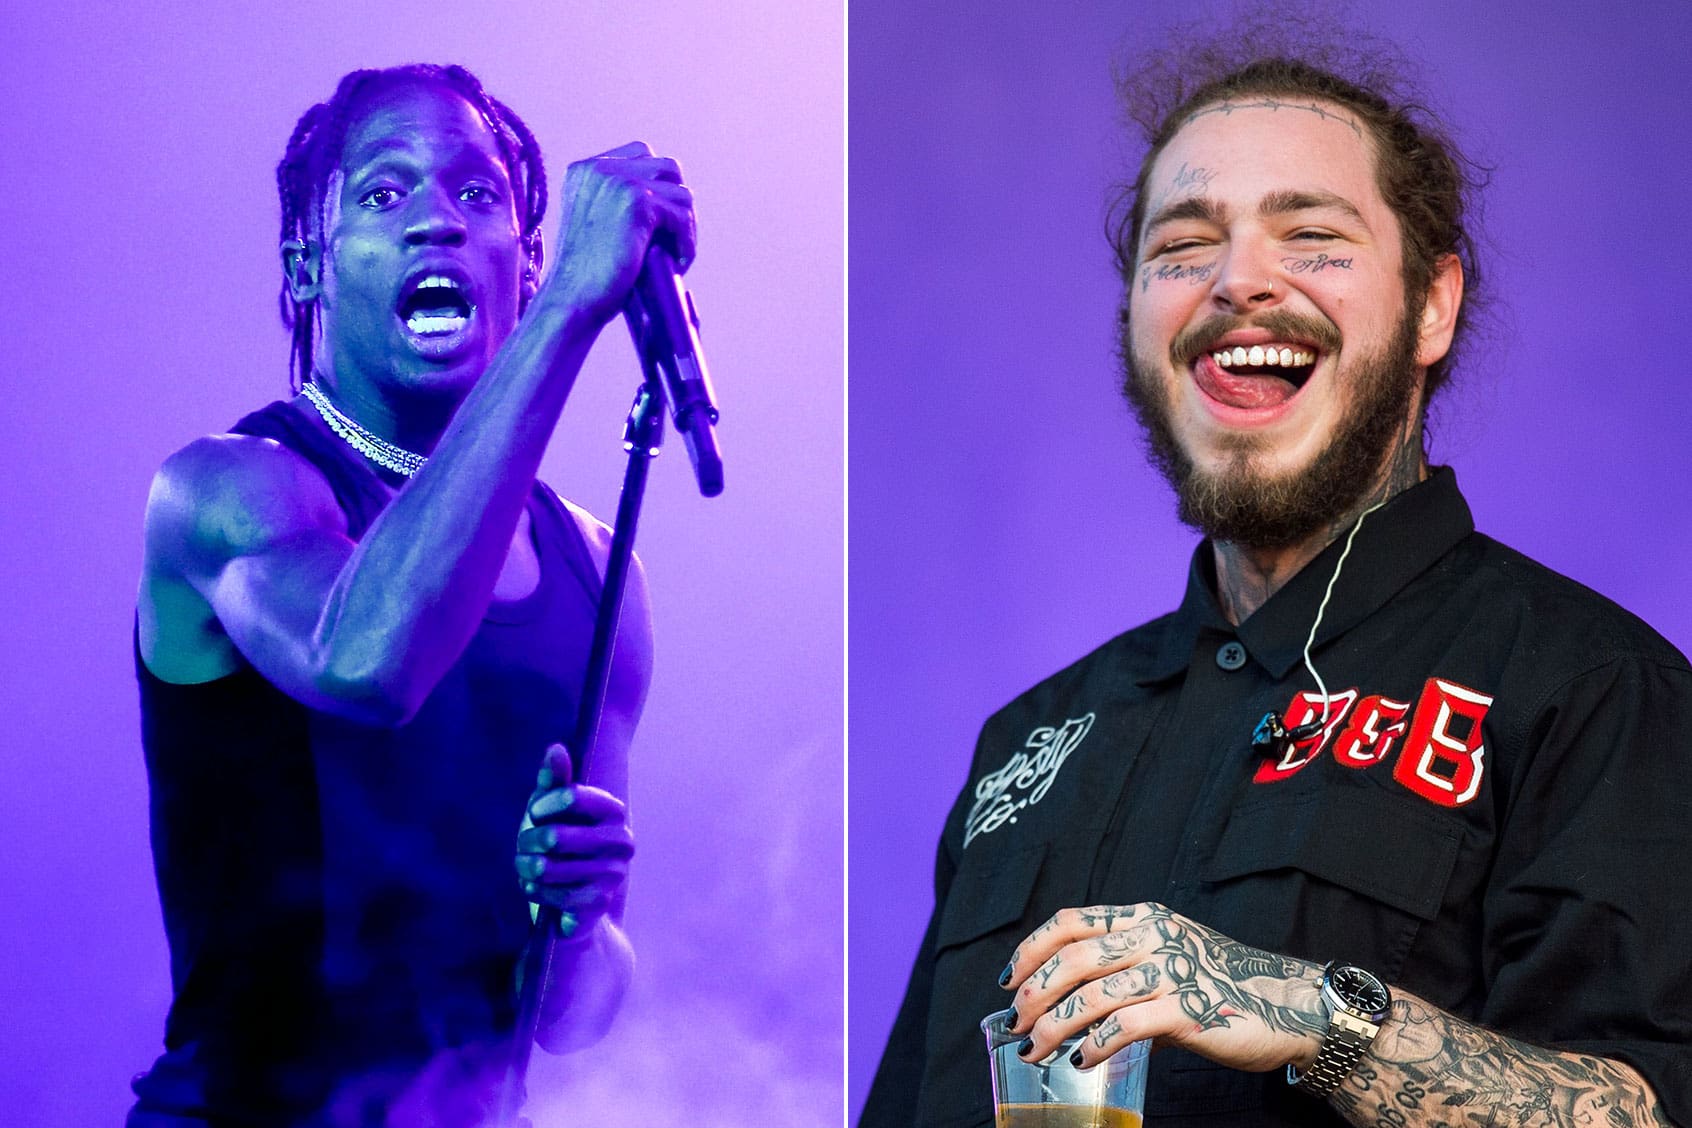 post-malone-to-replace-travis-scott-at-day-n-vegas-2021-festival-following-latest-tragedy